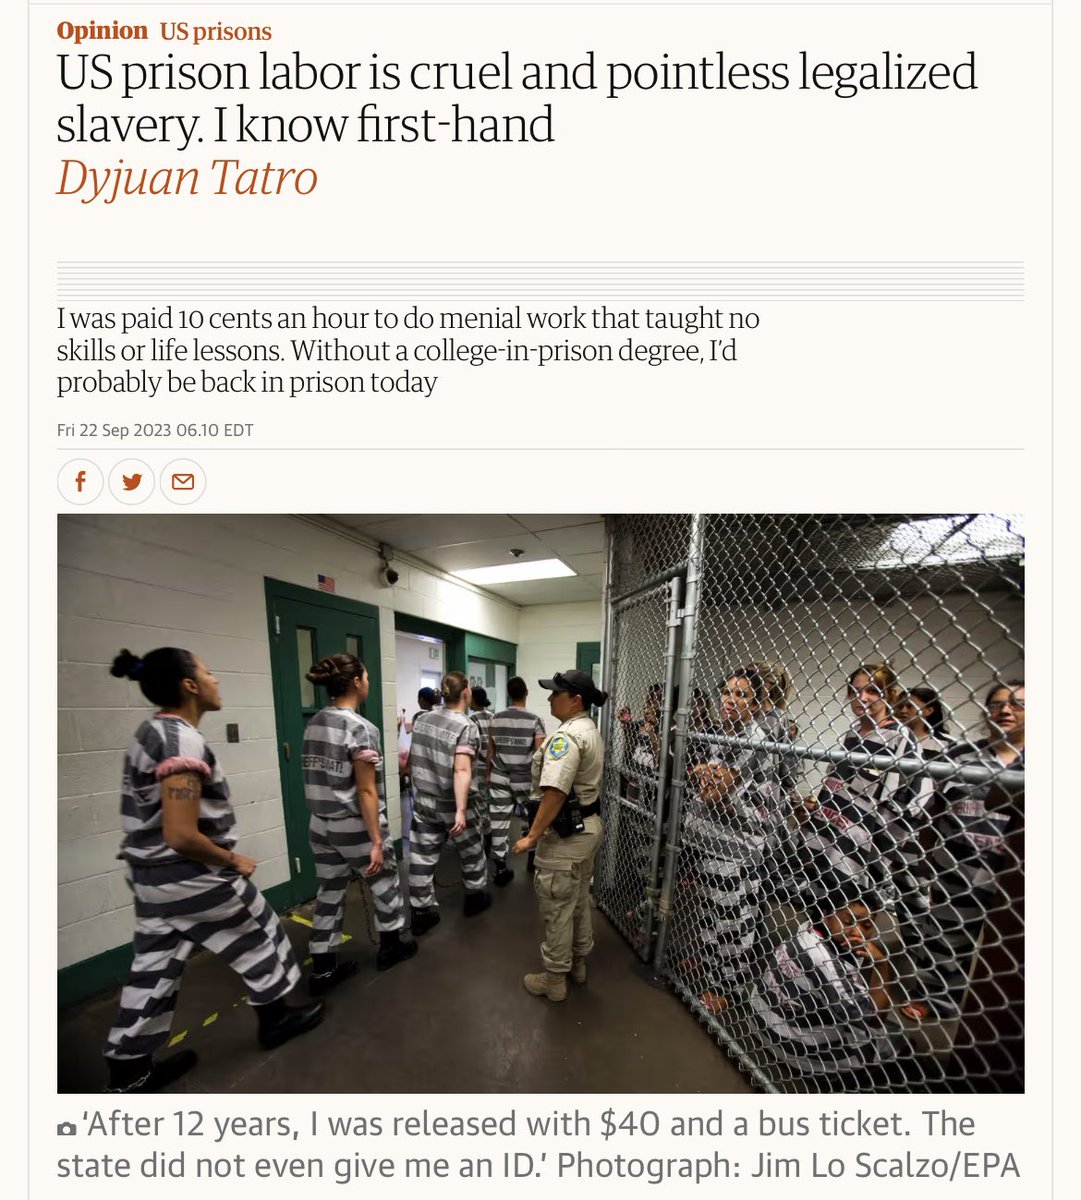 US prison labor is cruel and pointless legalized slavery. I know first-hand. “Prisons are designed to warehouse, traumatize and exploit people, then send them back home in worse shape than when they entered the system.” My latest for the @guardiannews. #EndTheException